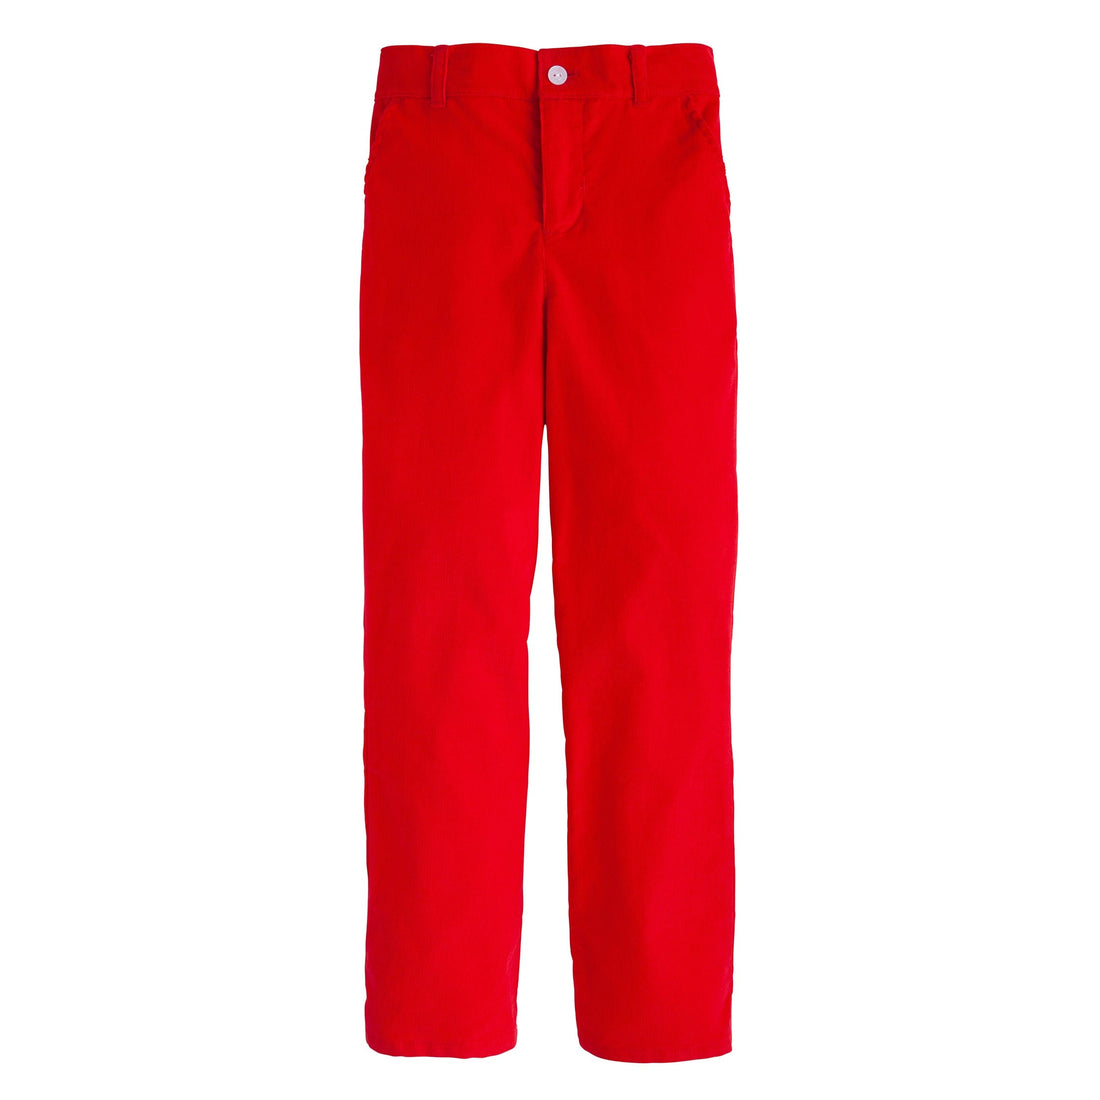 little english classic childrens clothing girls red corduroy skinny pant